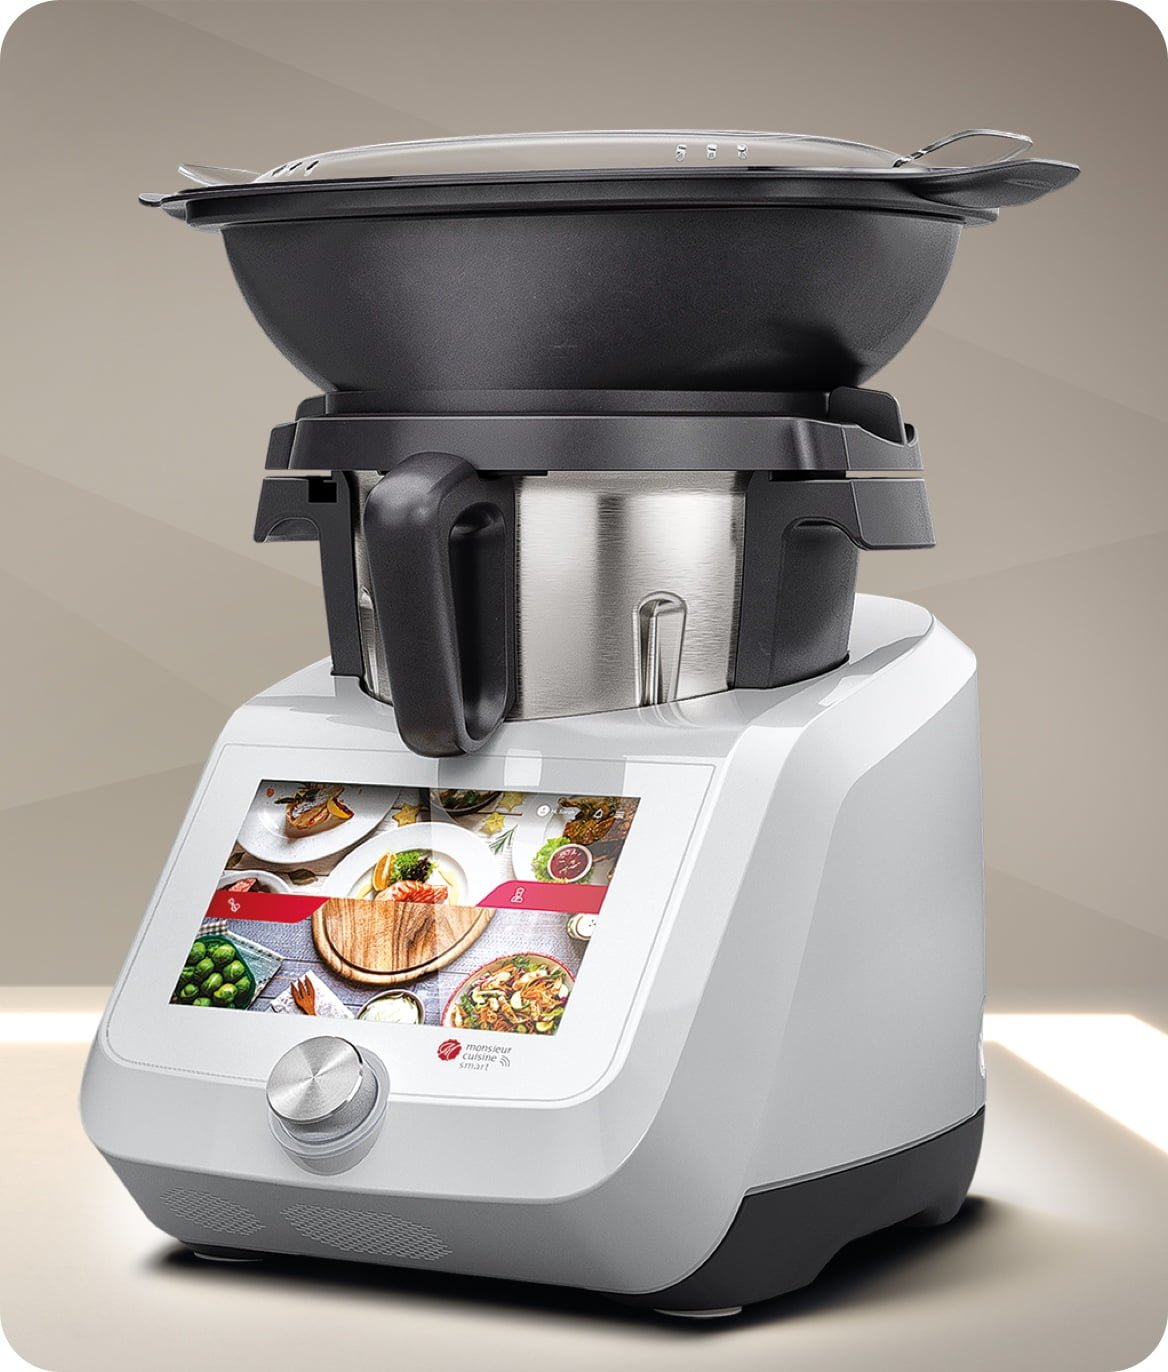 Silver crest Monsieur cuisine smart💐SOLD💐 With complete accessories and  manual Includes over 200 recipes on how to cook and bake Your…